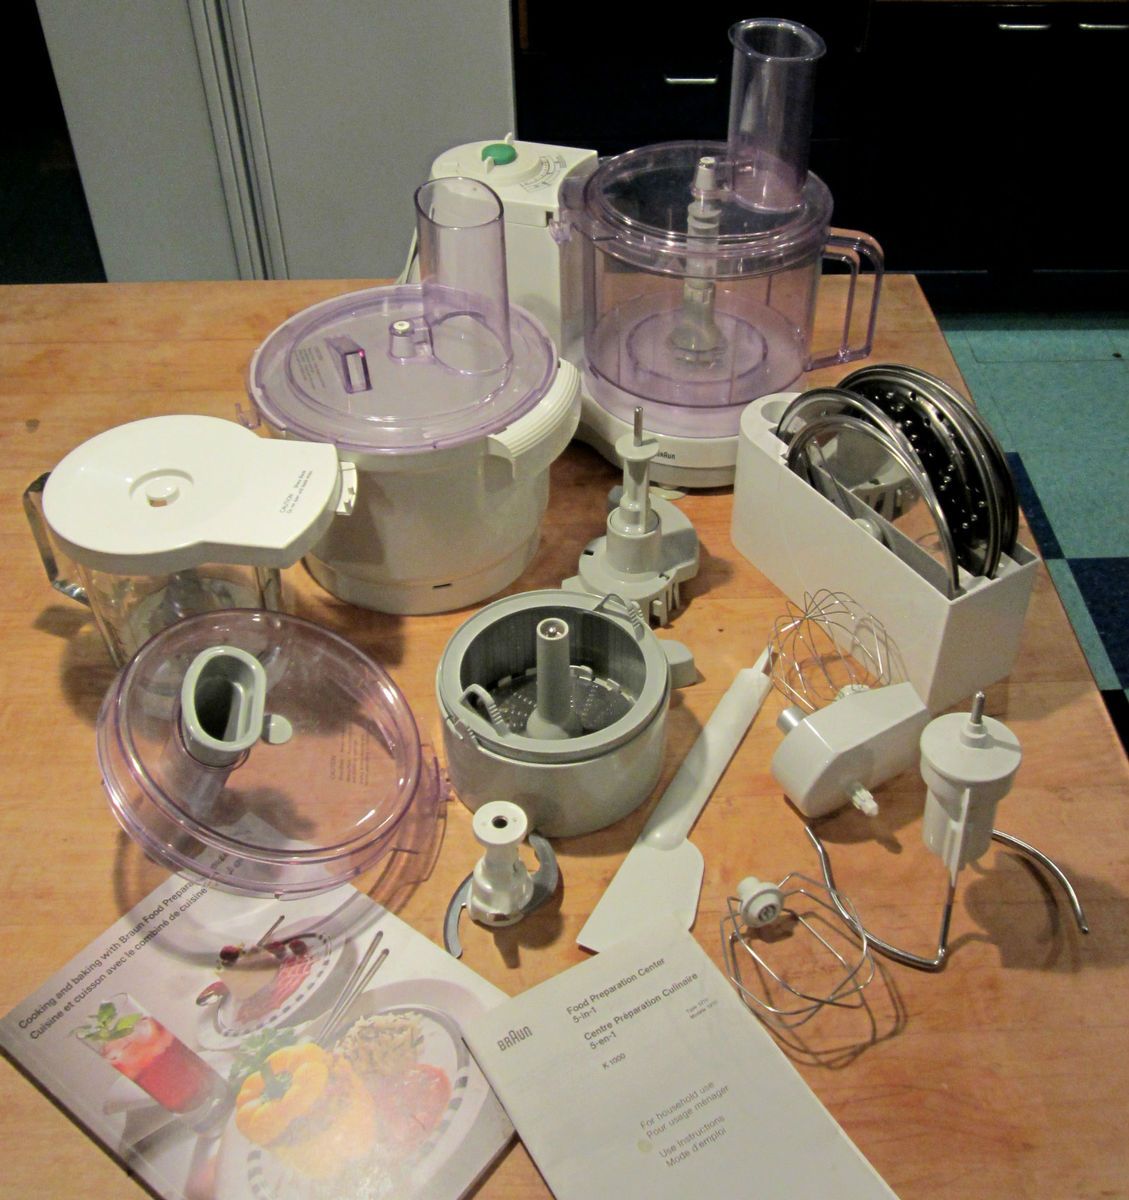 Braun KM1000 3210 Food Processor Mixer and Attachments Kitchen PopScreen